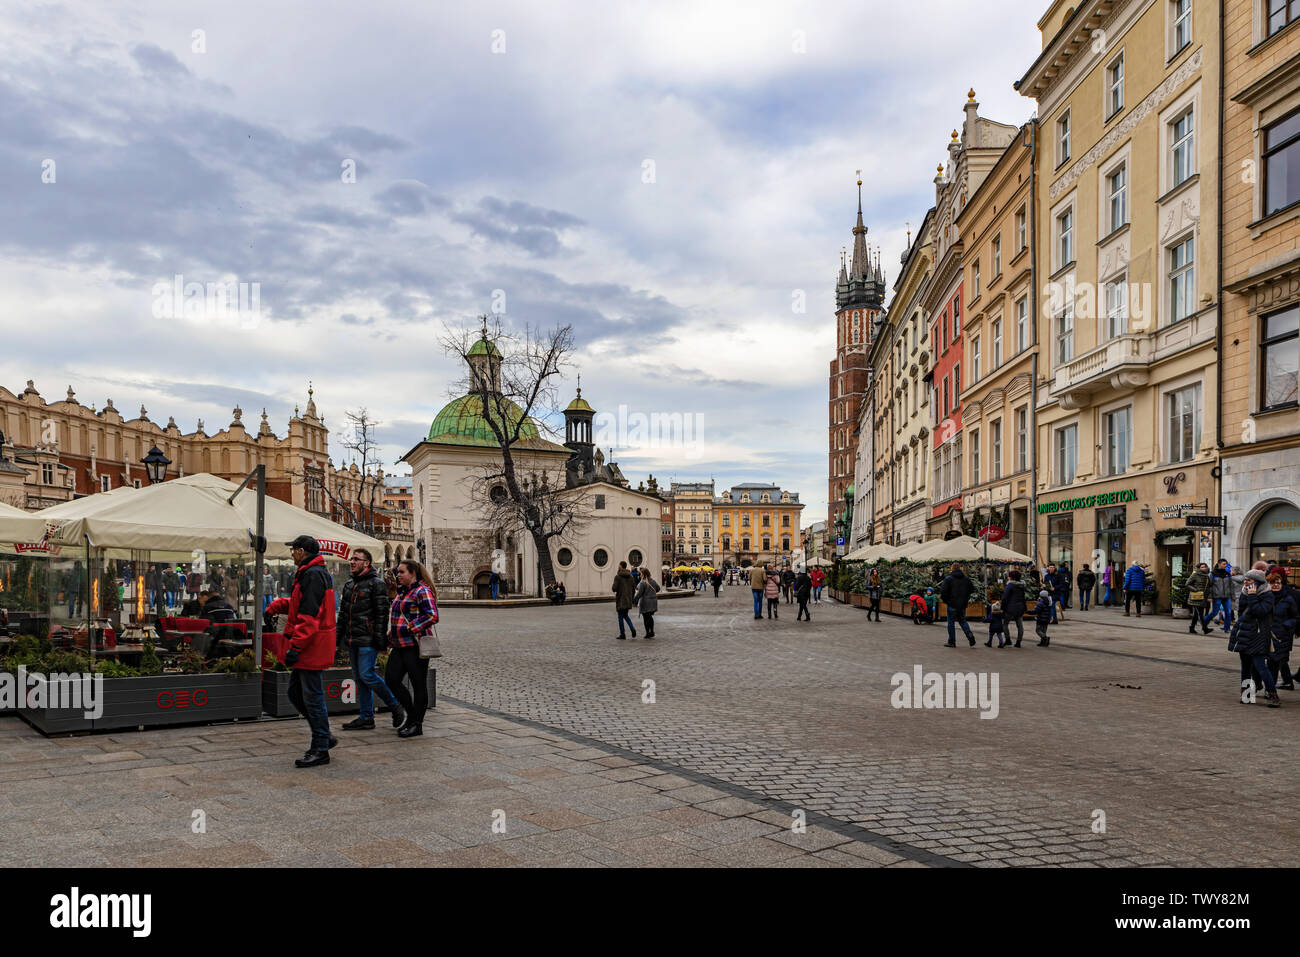 Cracow, Poland – Feb 2, 2019: Tourists at main square passing by The Church of St. Adalbert or of St. Wojciech, the 11th century church in Cracow, Pol Stock Photo